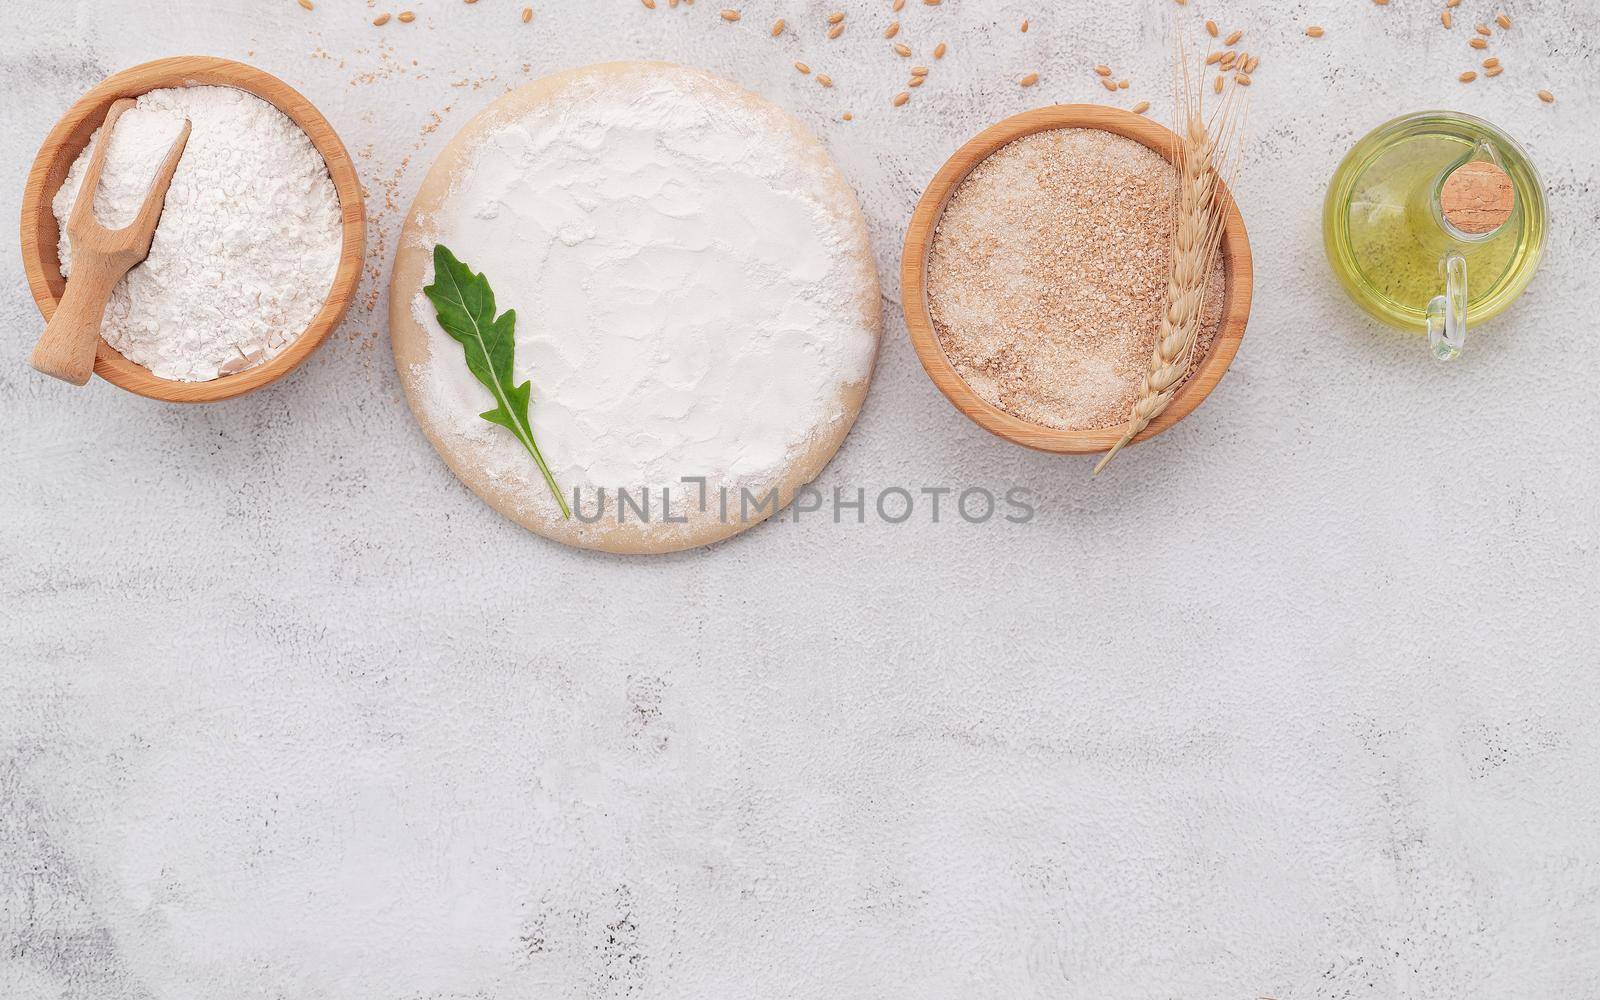 The ingredients for homemade pizza dough with wheat ears ,wheat flour and wheat grains set up on white concrete background.